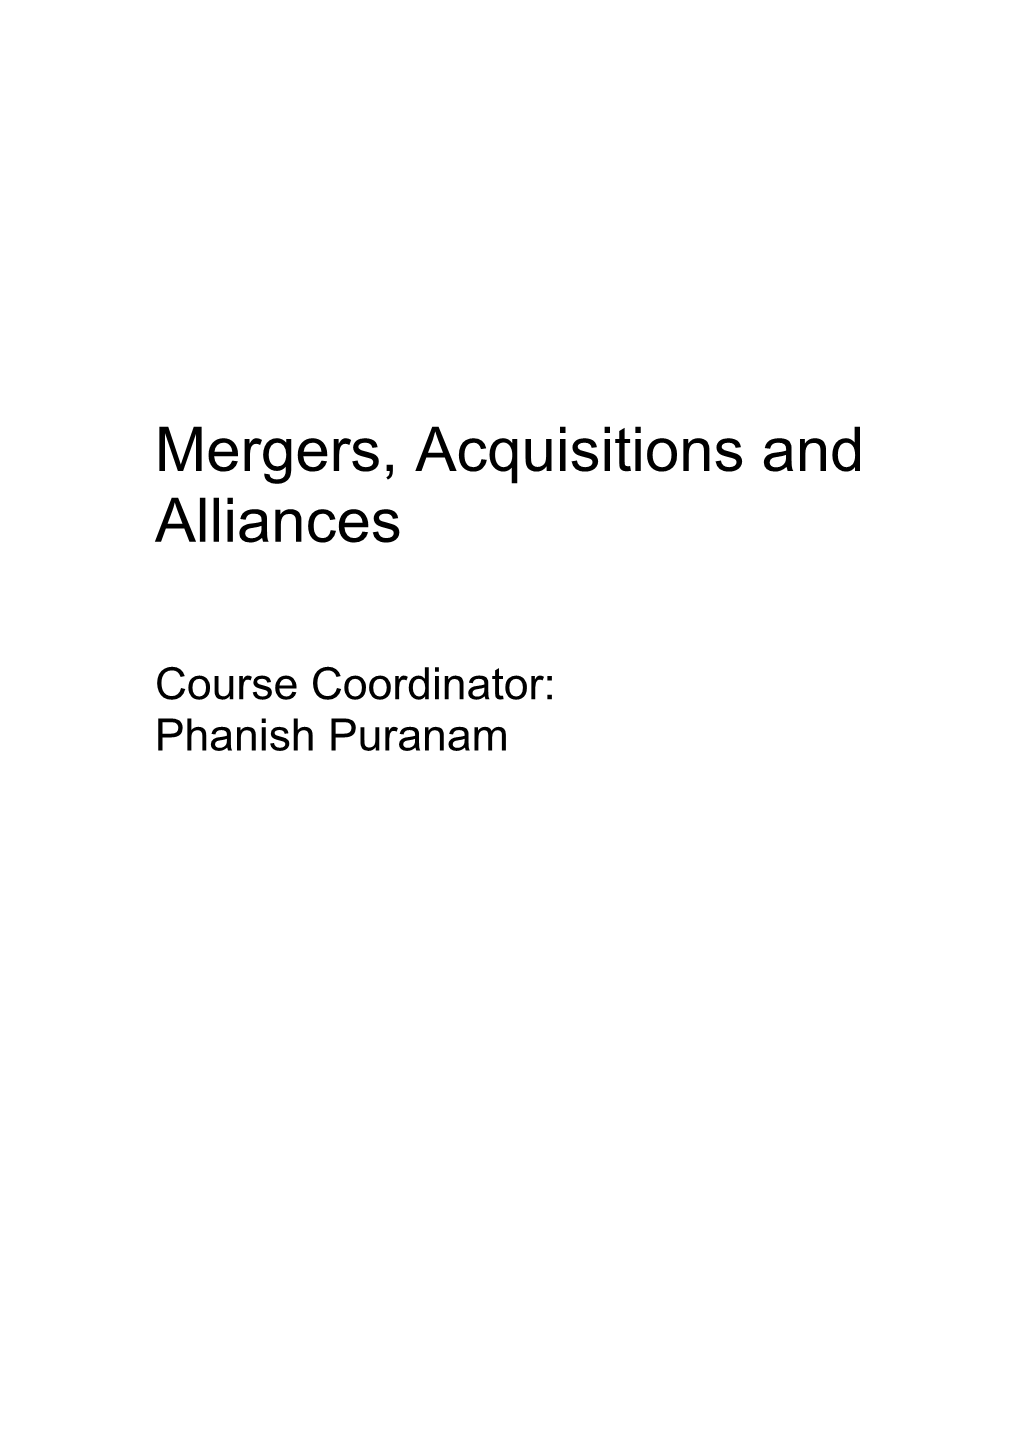 Mergers, Acquisitions and Alliances